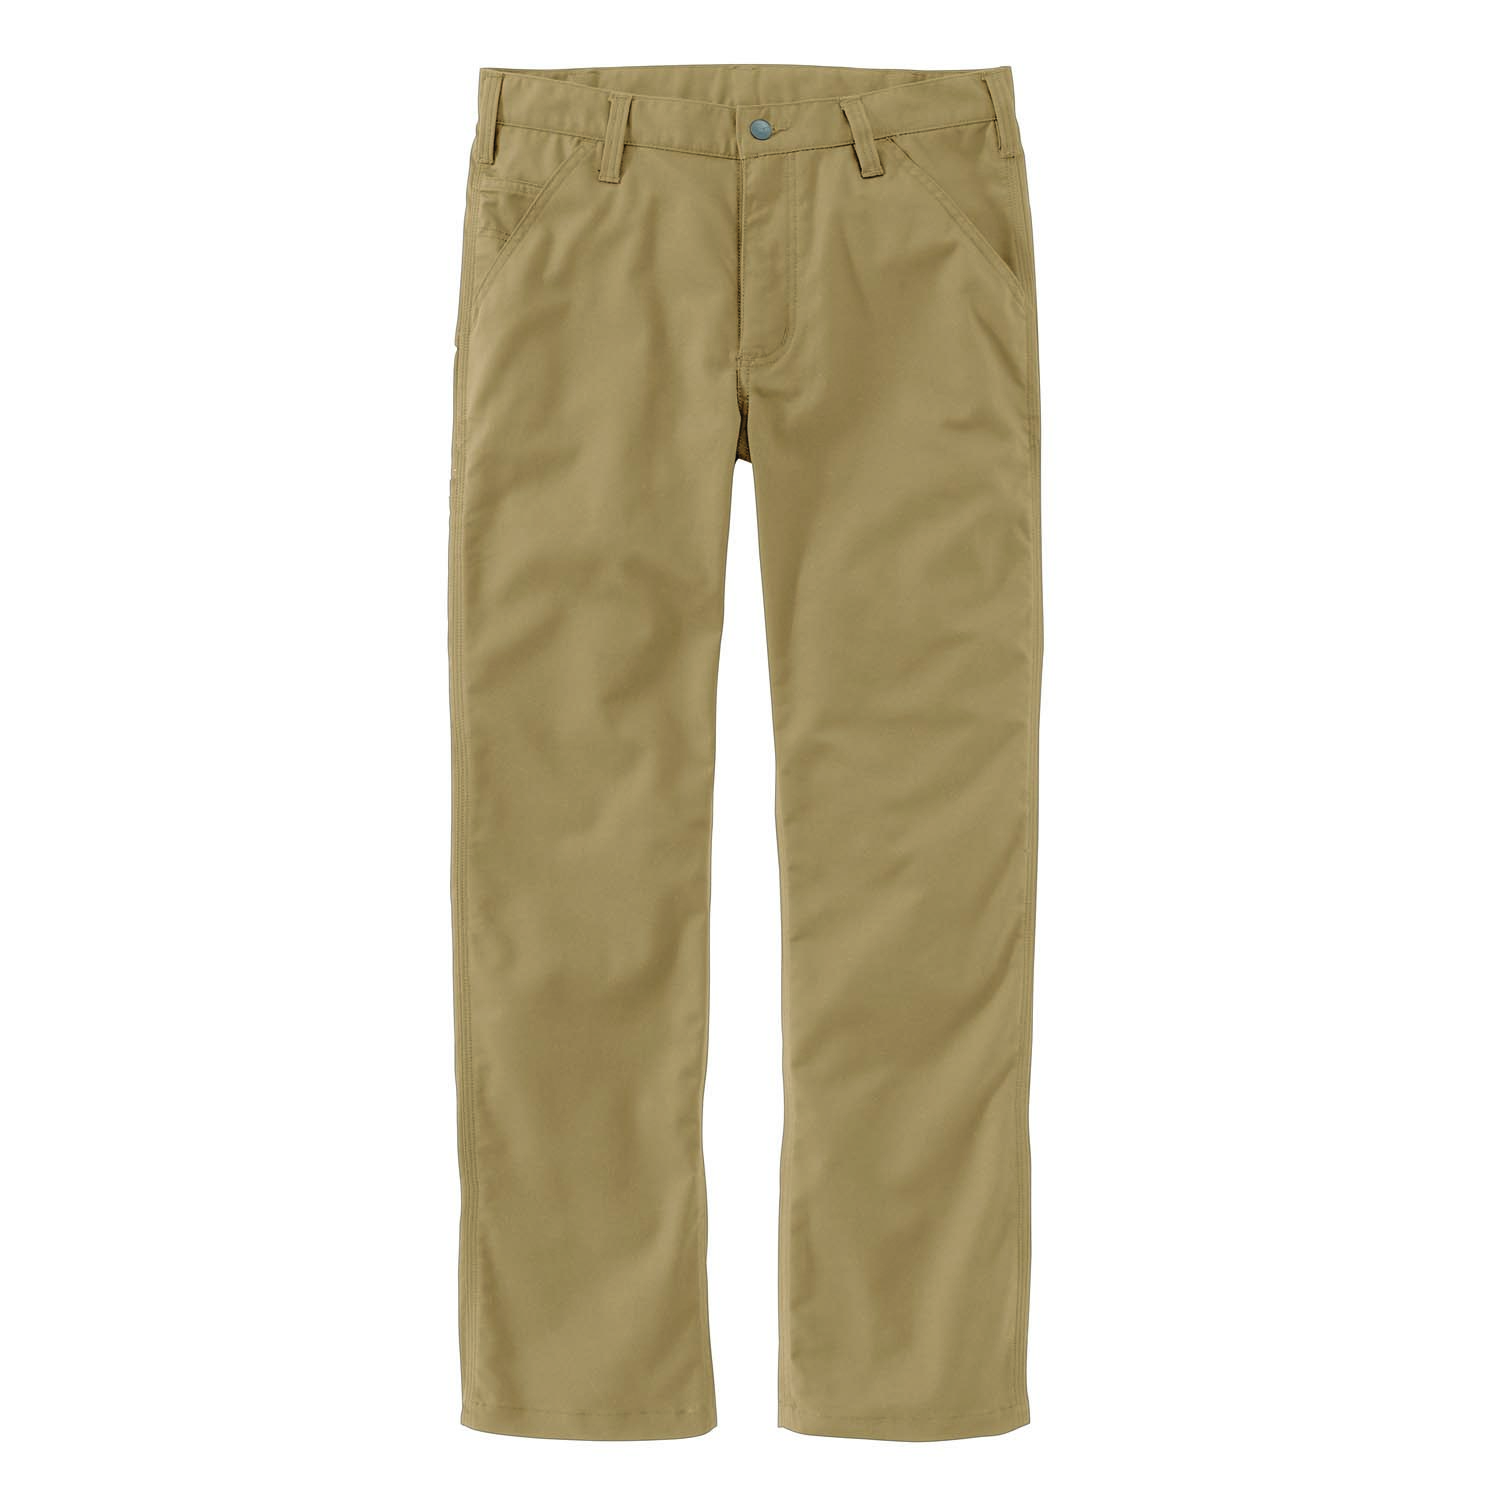 CARHARTT MEN'S RUGGED PROFESSIONAL SERIES RELAXED FIT PANTS